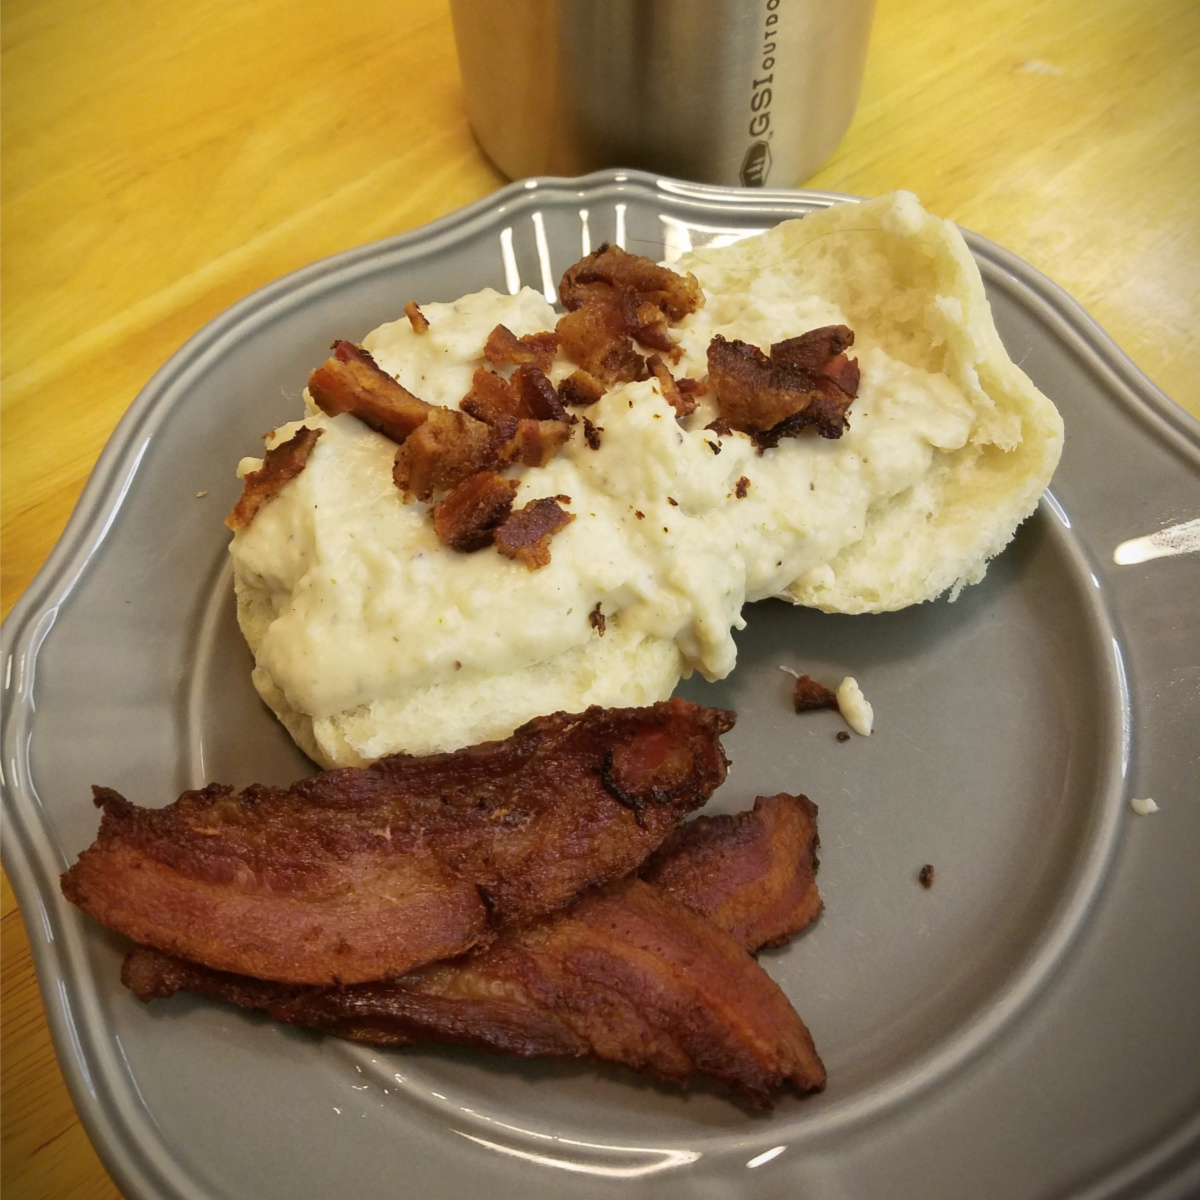 Cowboy breakfast with biscuits, bacon, and gravy The West Starts Here Briscoe Western Art Museum